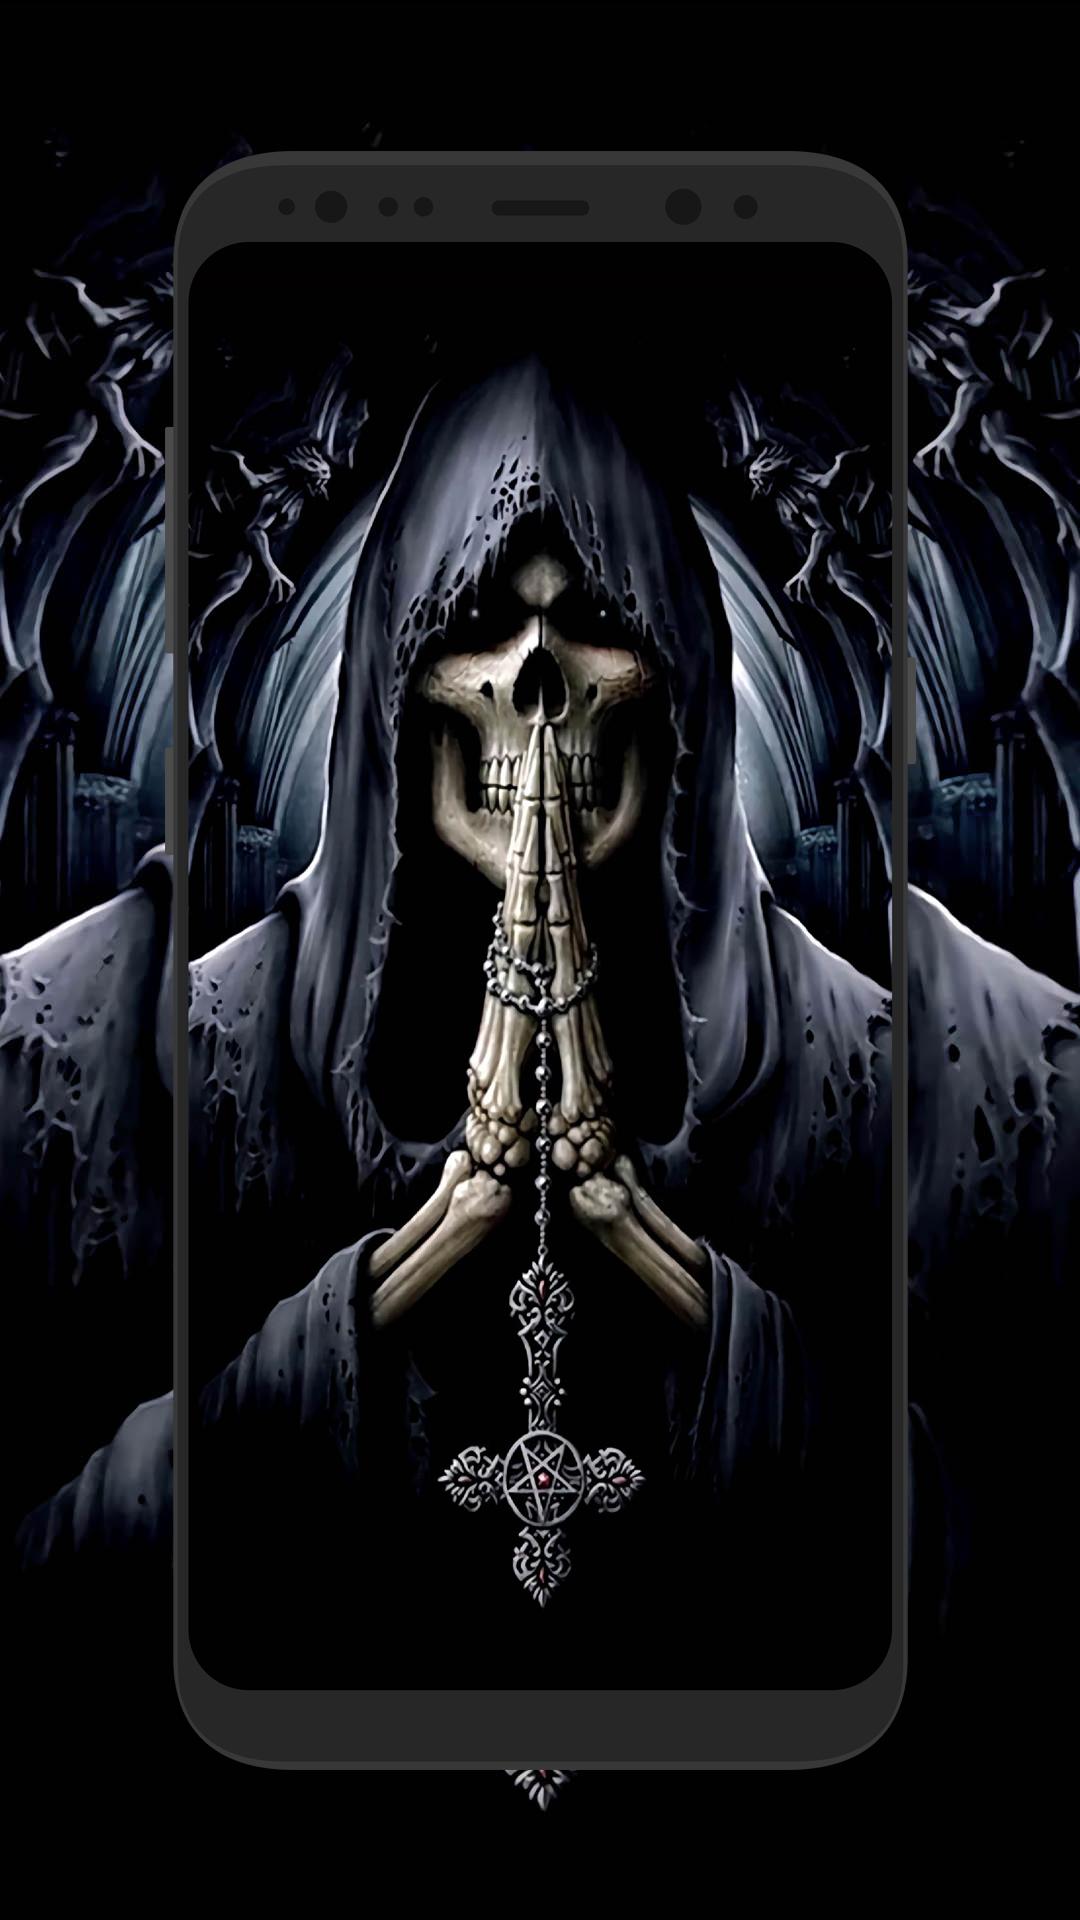 Grim Reaper HD Wallpapers 4k for Android - APK Download